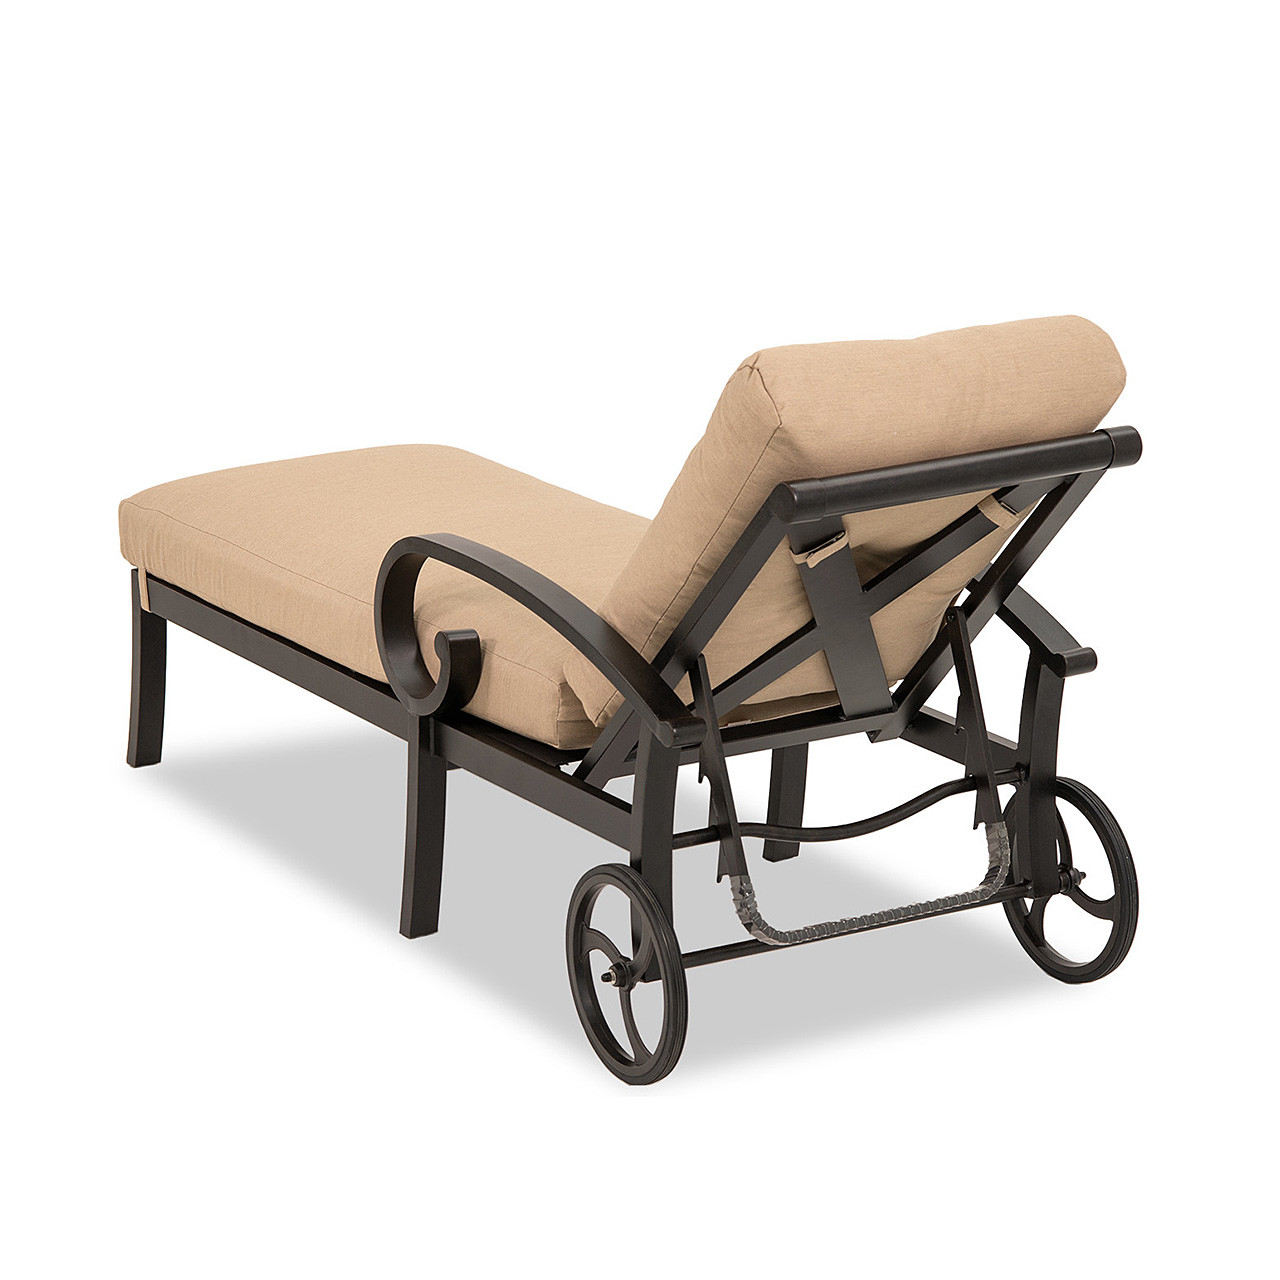 Solstice Aged Bronze Aluminum with Cushions Chaise Lounge